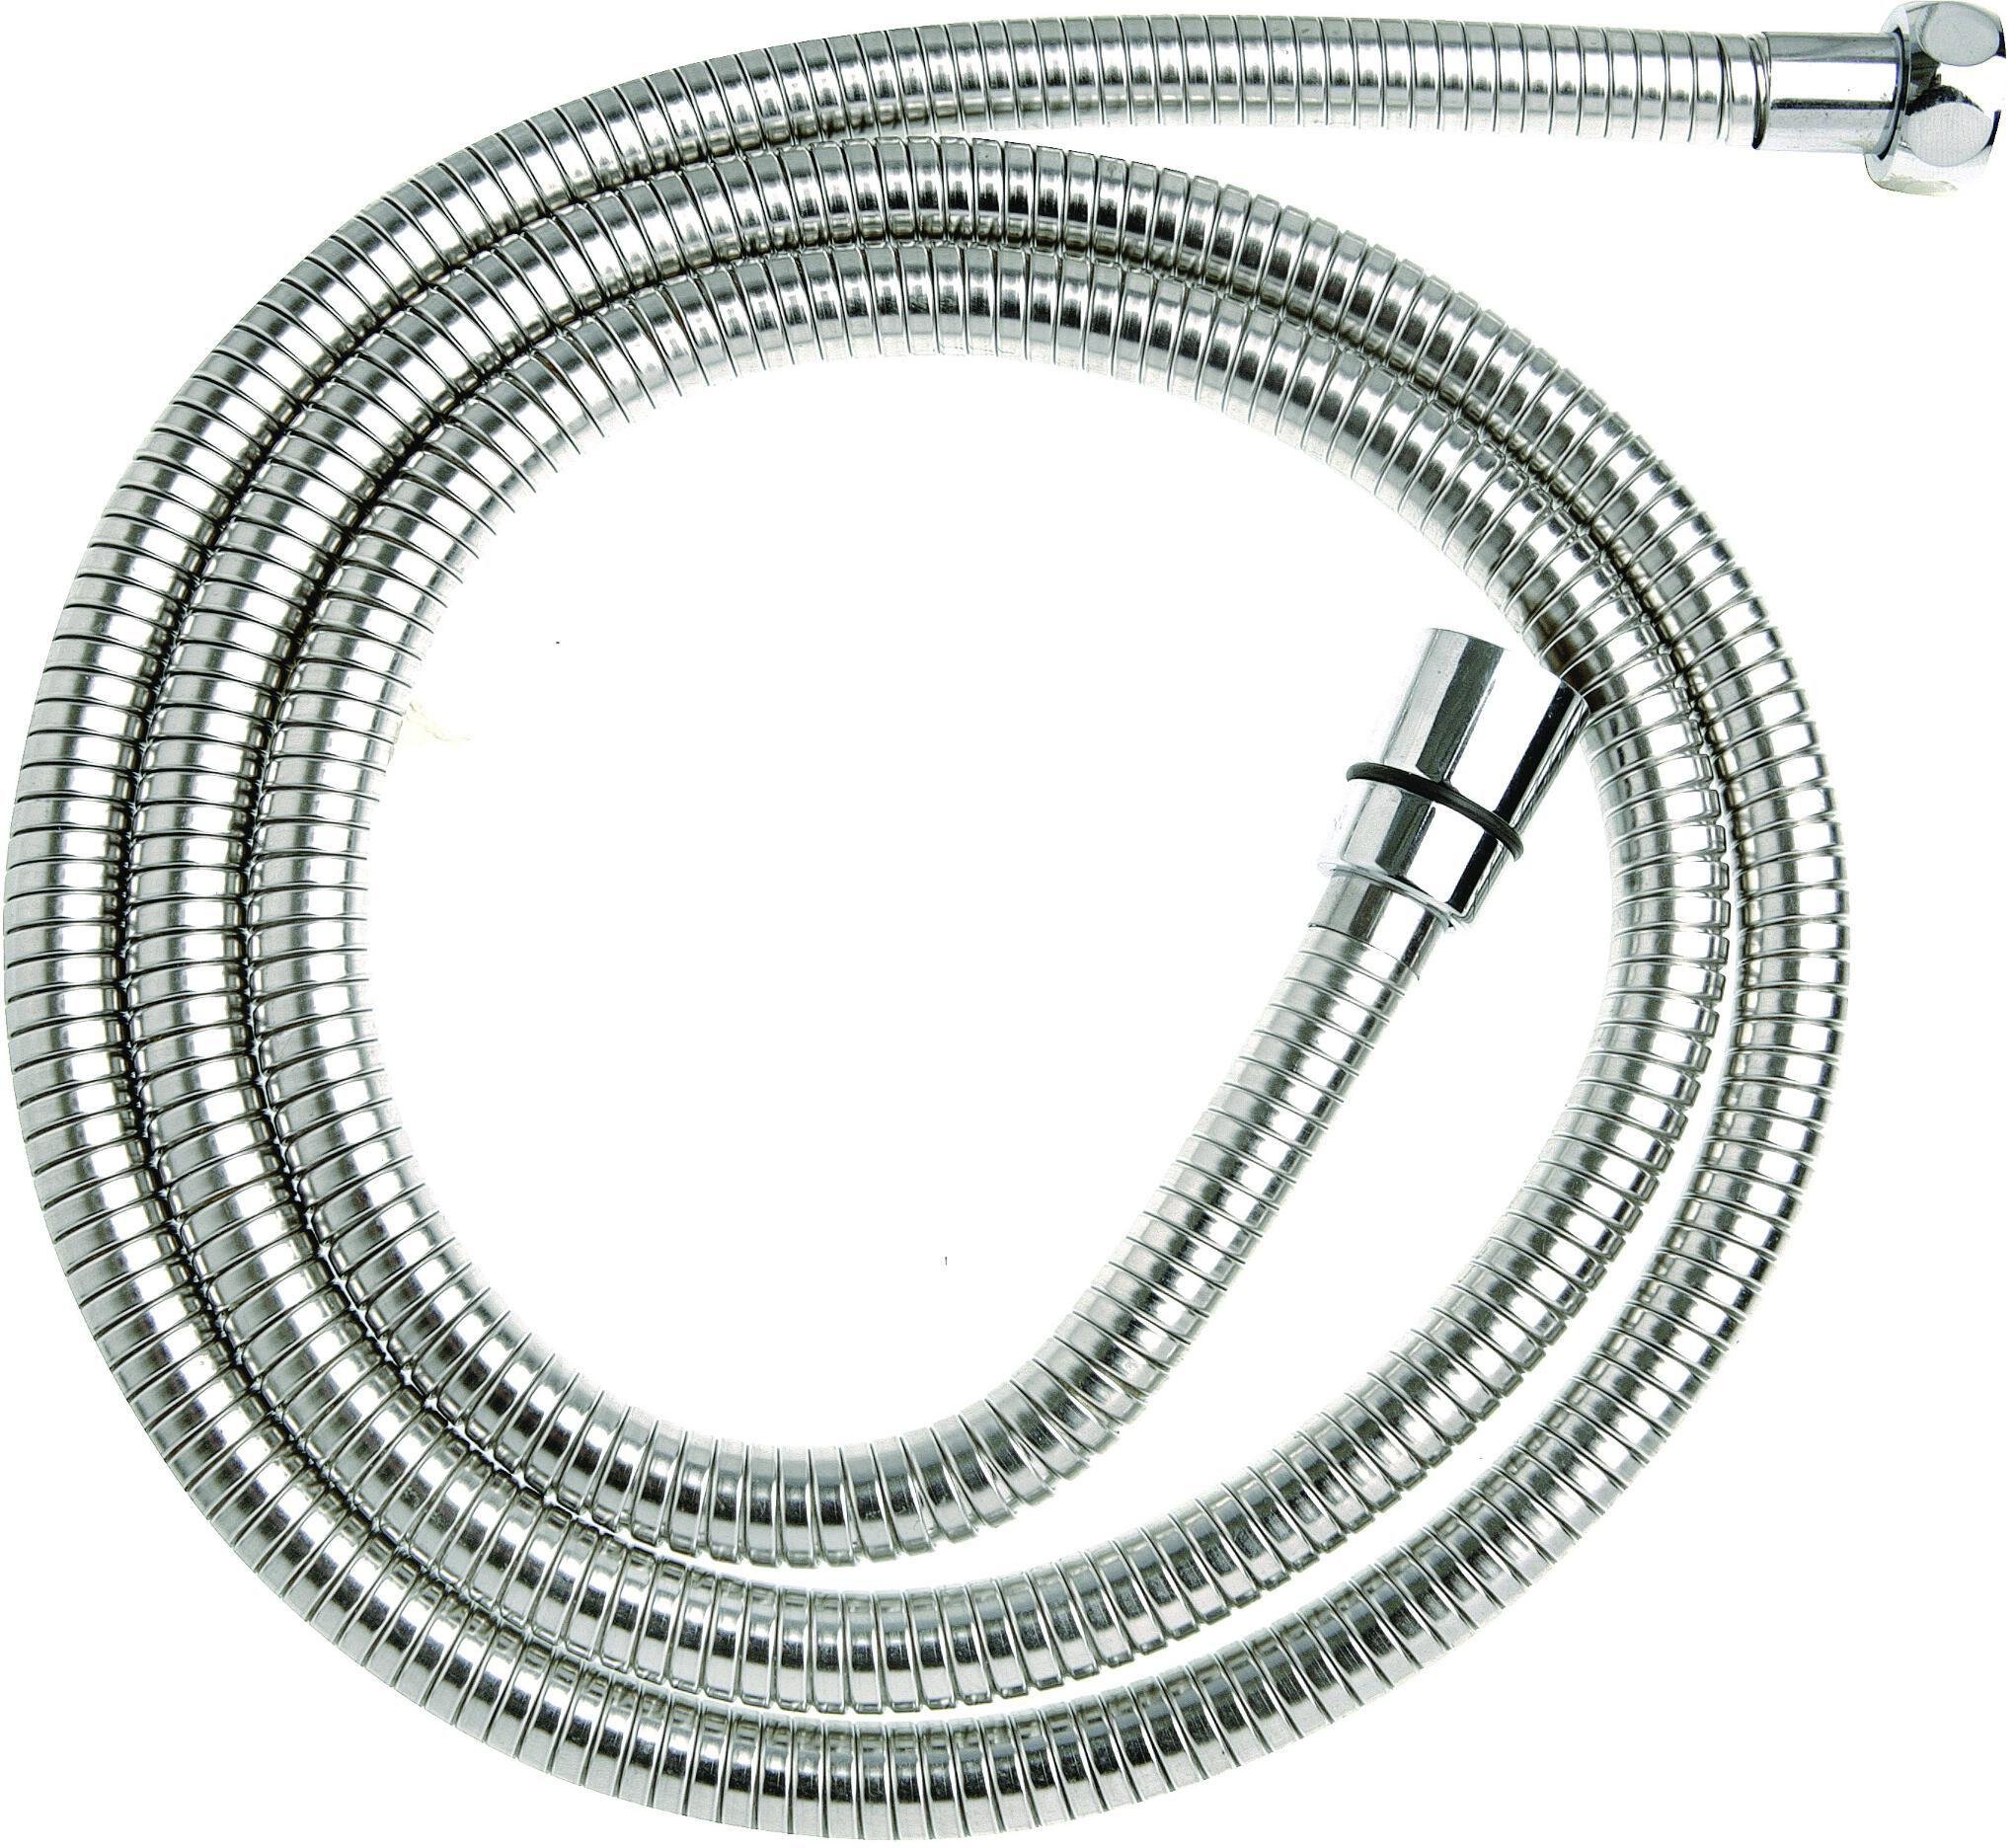 Croydex Wide Bore 2m S/Steel Stretch Shower Hose review